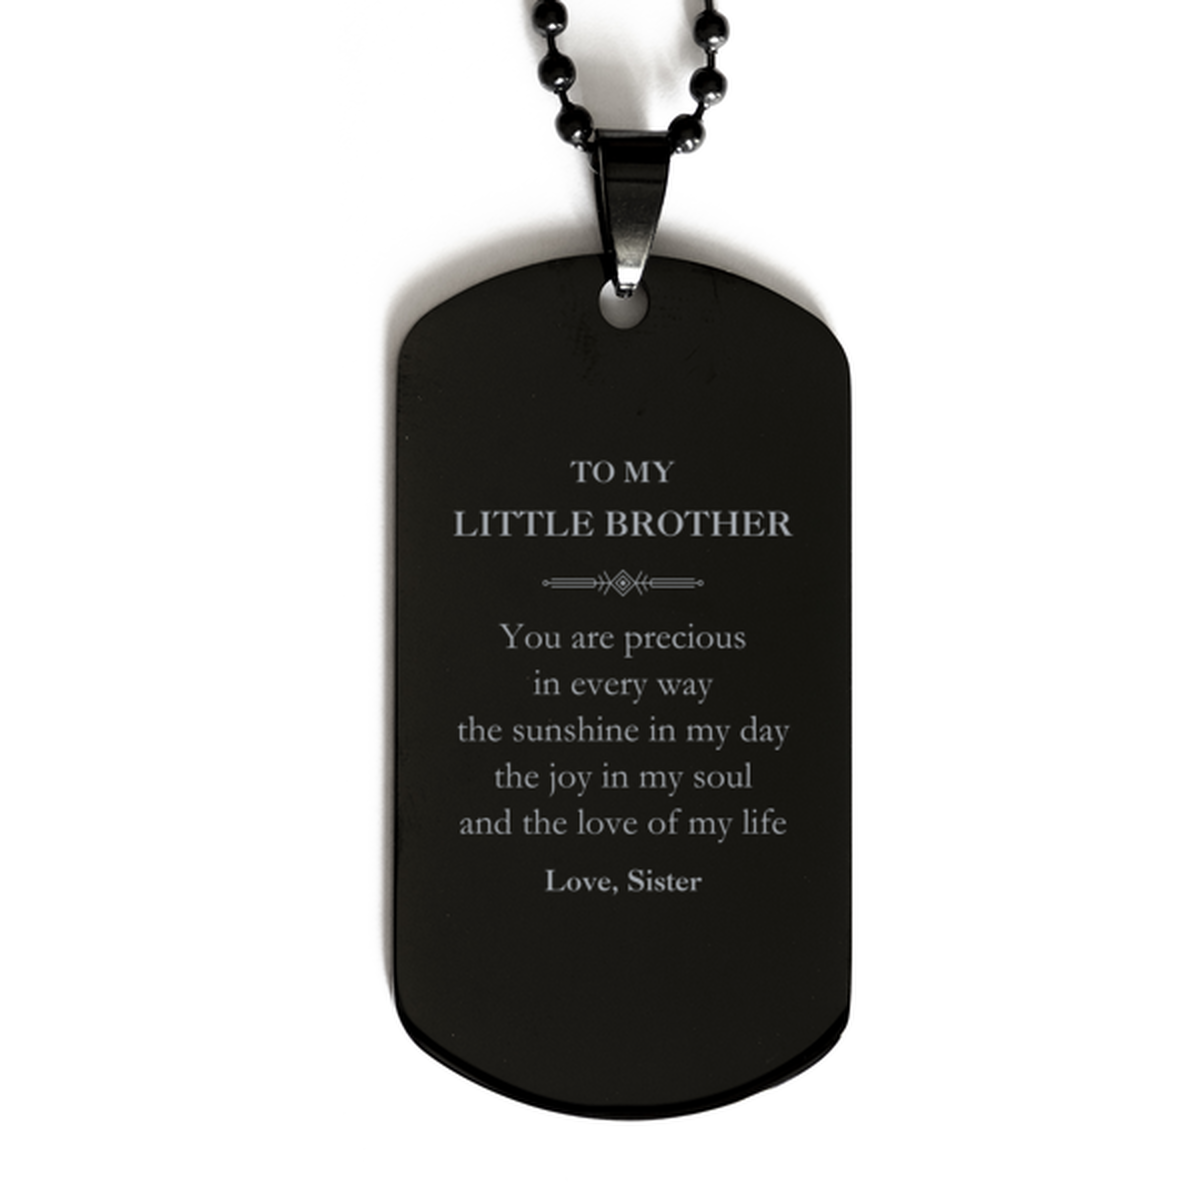 Graduation Gifts for Little Brother Black Dog Tag Present from Sister, Christmas Little Brother Birthday Gifts Little Brother You are precious in every way the sunshine in my day. Love, Sister